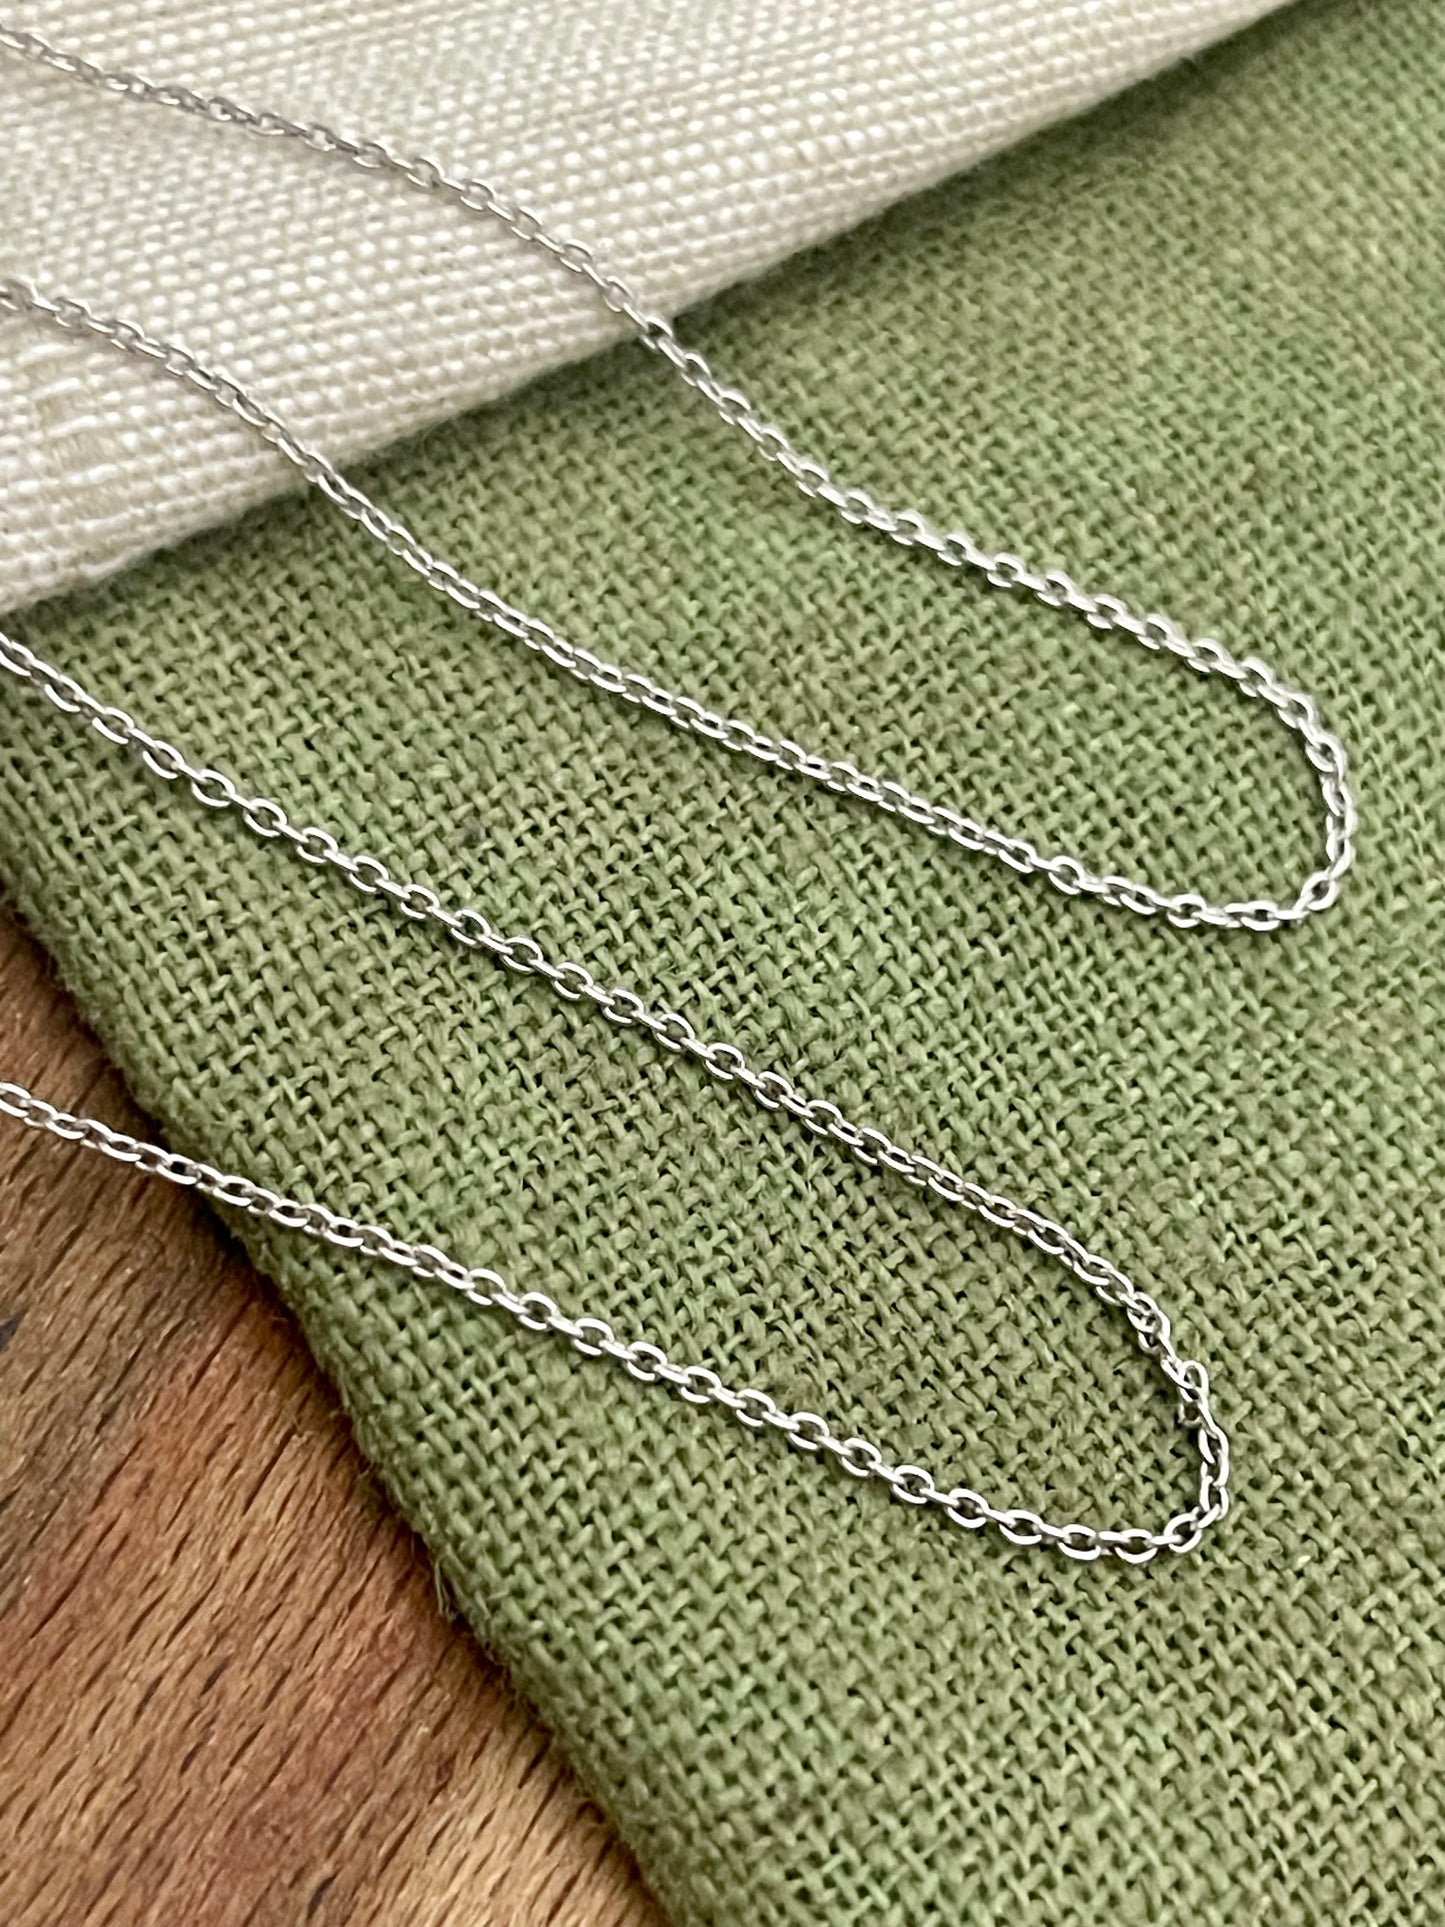 Thin Belture Link Chain Necklace Solid Sterling 925 Silver 17" Inch Jewellery